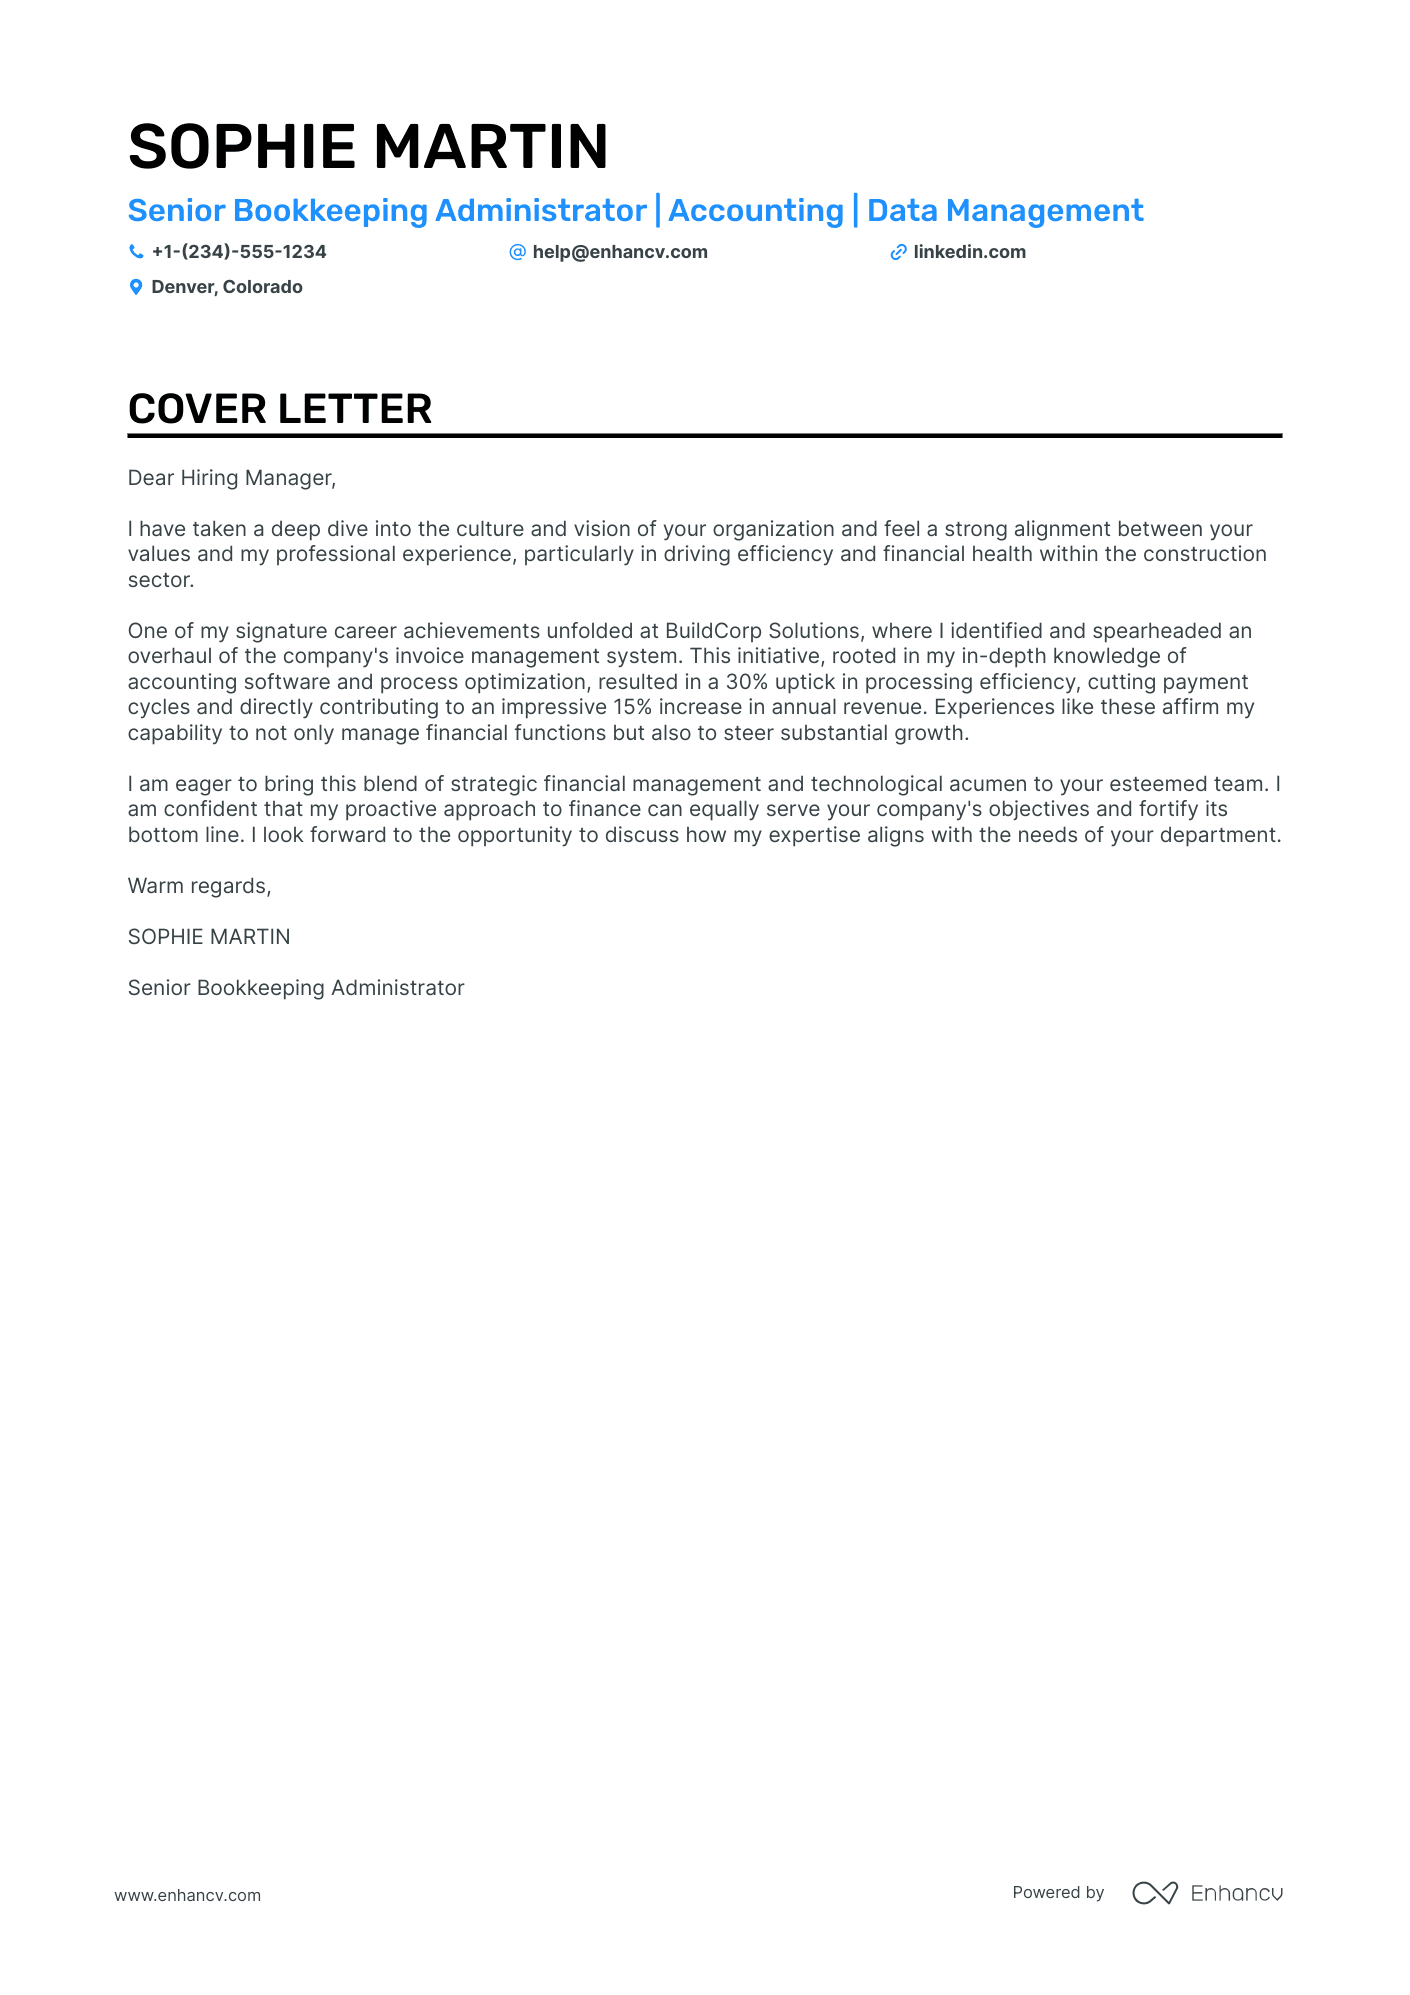 example of cover letter for accounting job